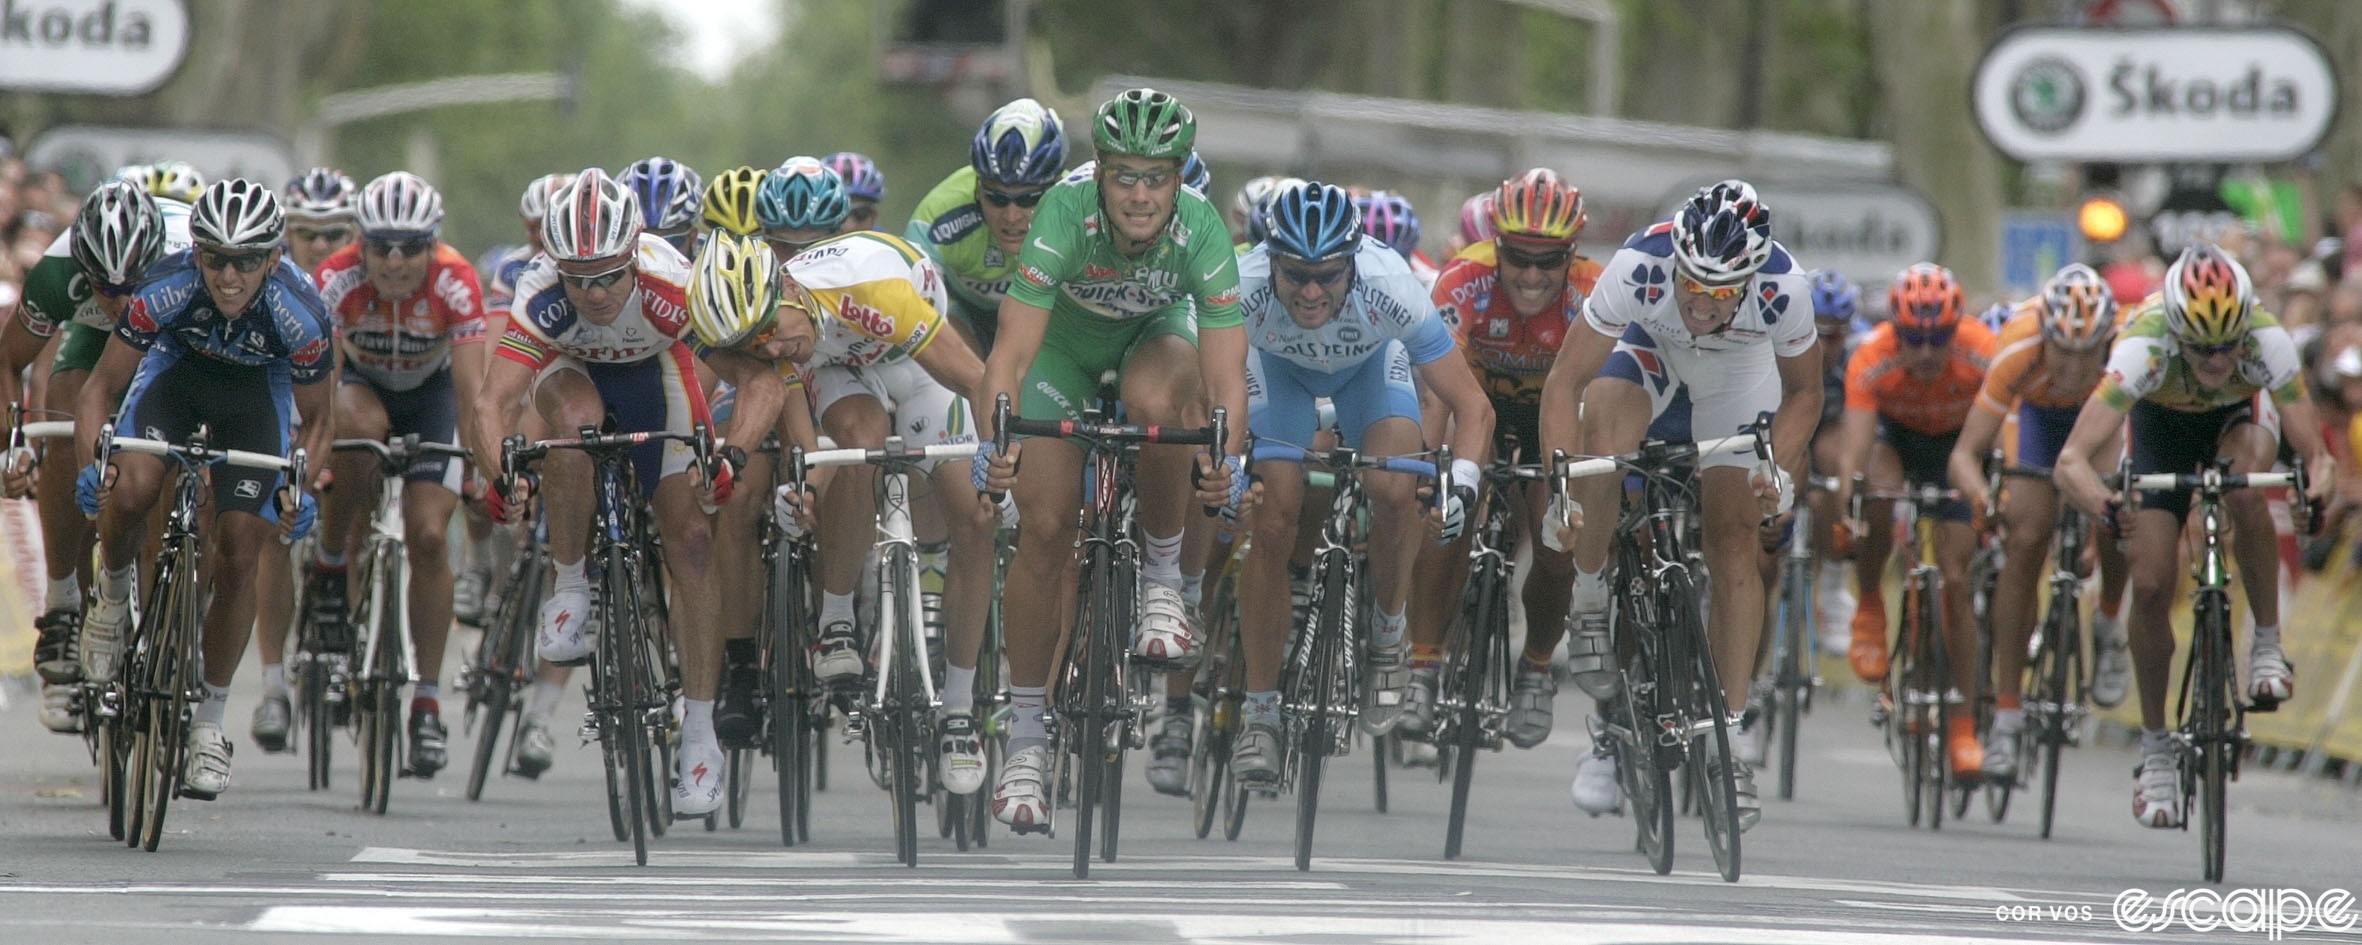 A wide-angle shot of a Tour de France sprint finish, with Australian sprinters Robbie McEwen and Stuart O'Grady tangling just before the line. McEwen leans far over his bike to headbutt O'Grady's left shoulder.